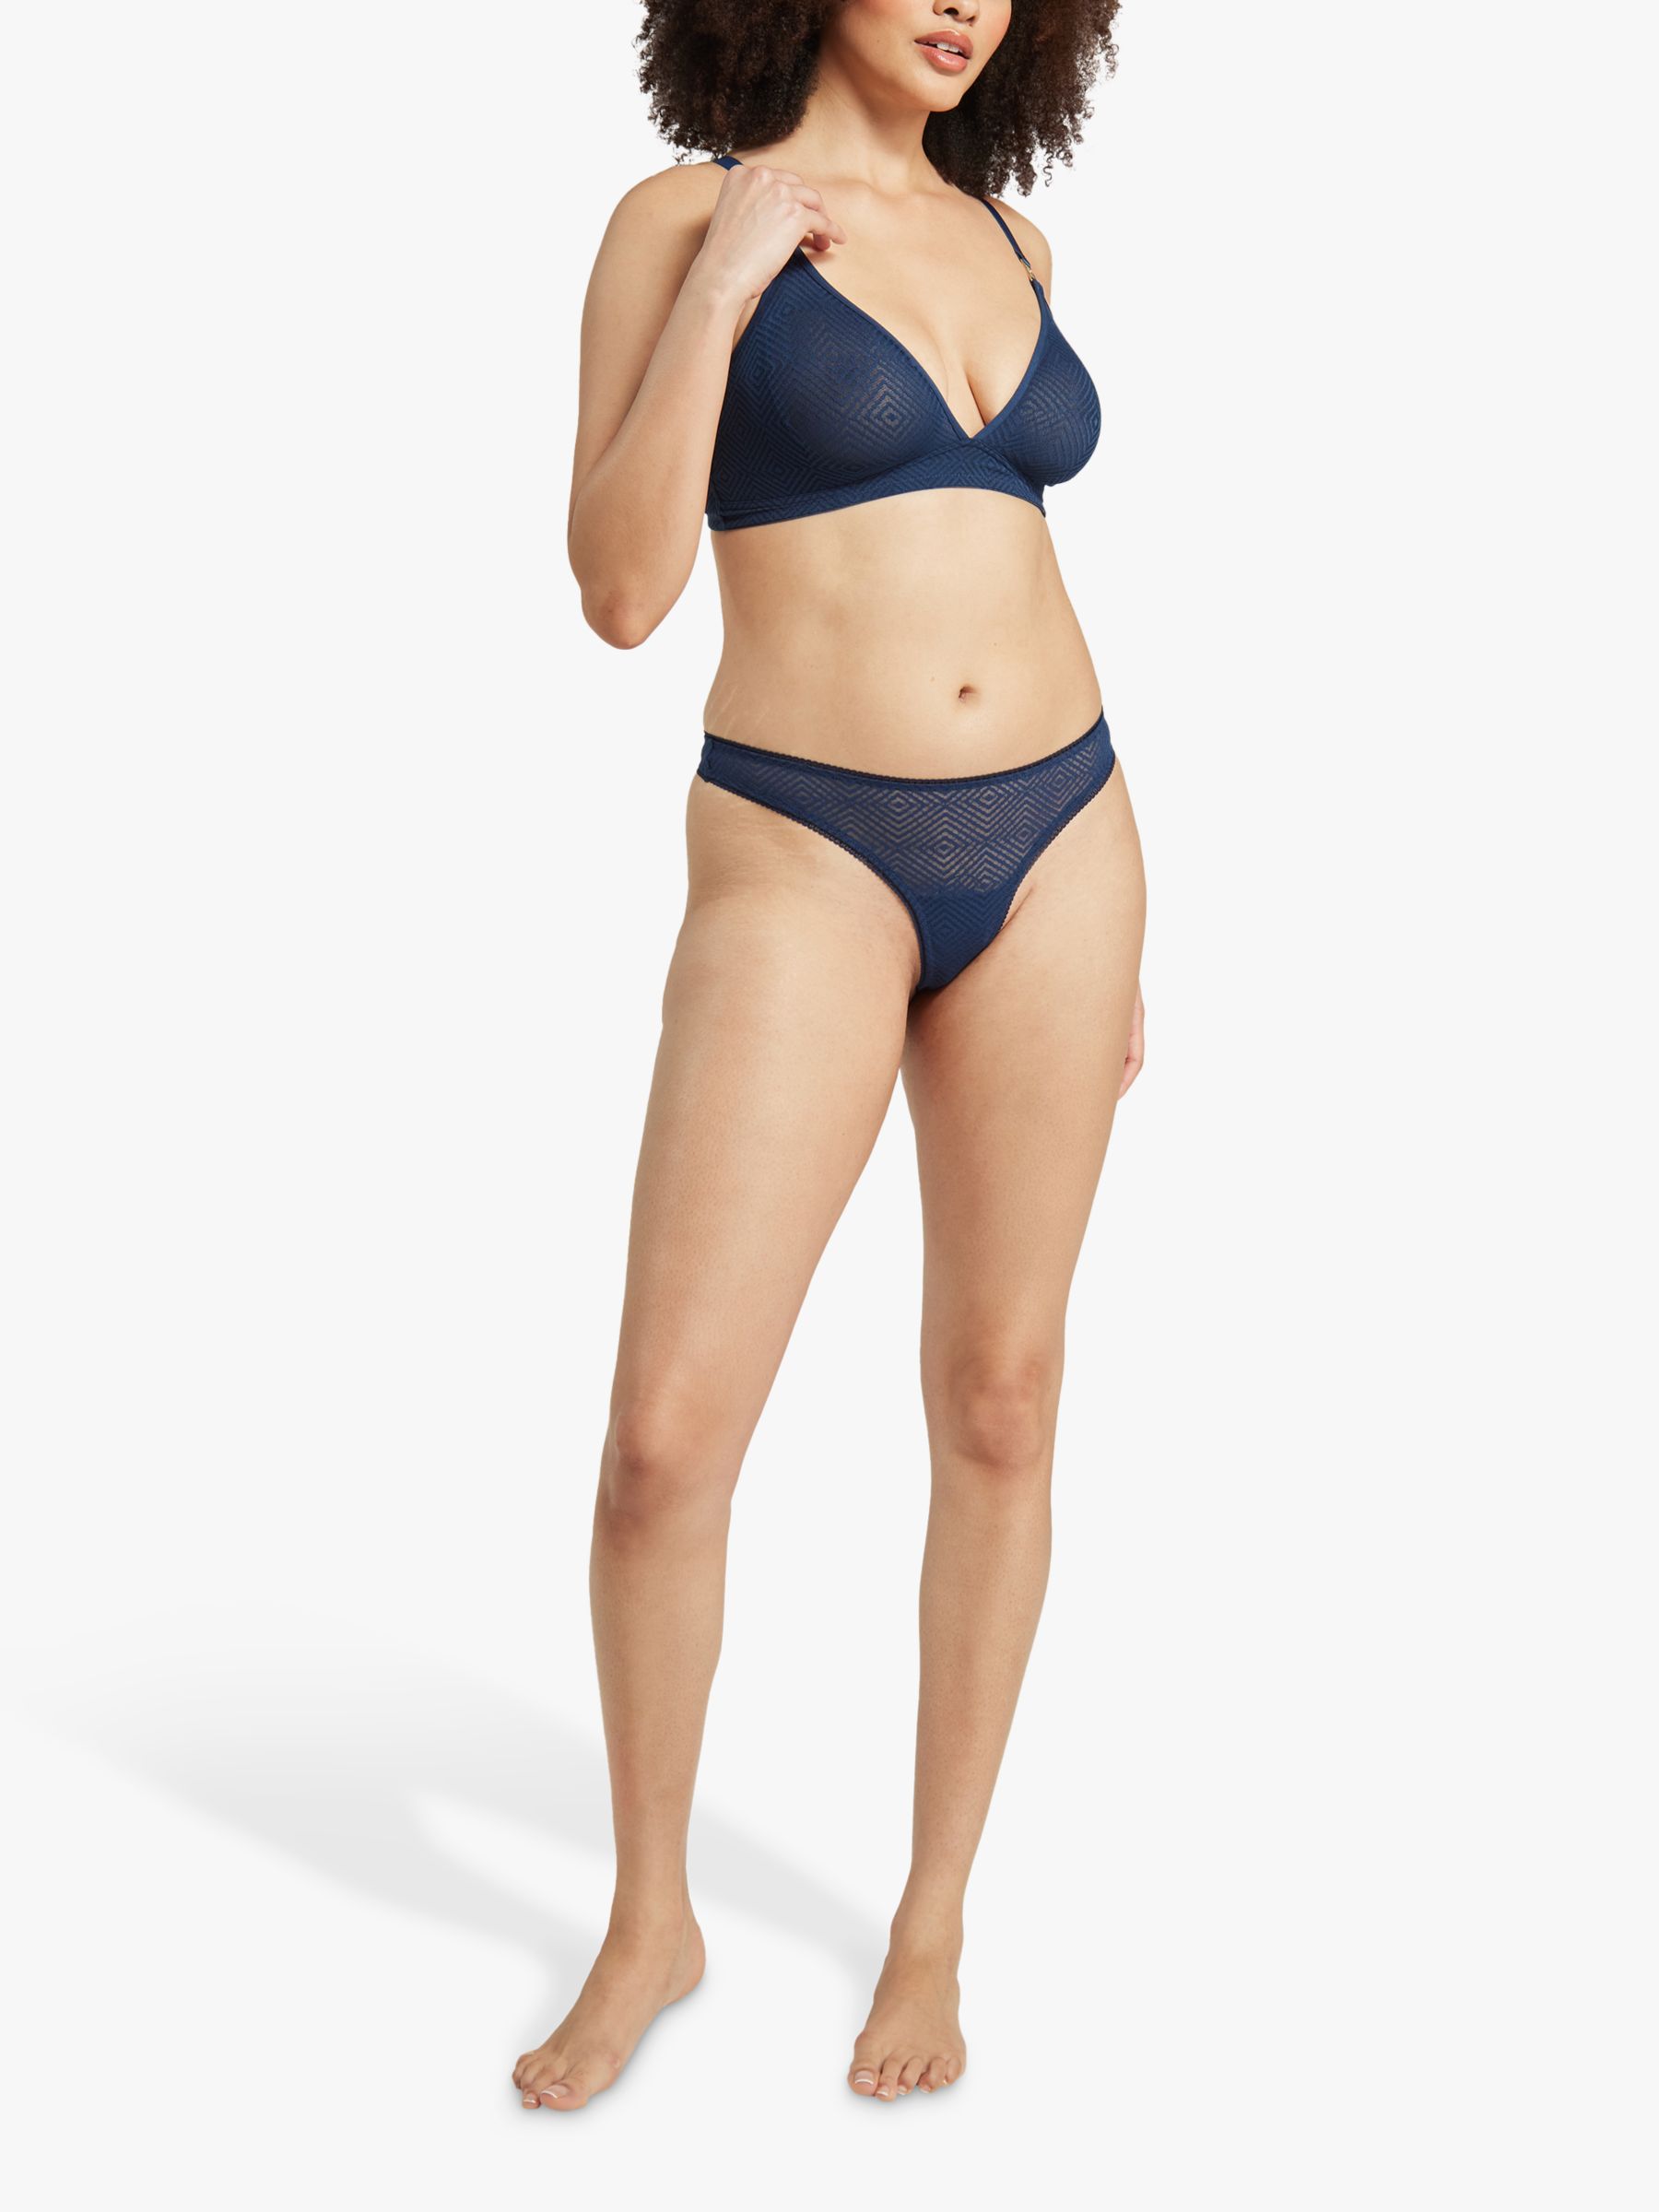 Nudea Barely There Thong, Black at John Lewis & Partners